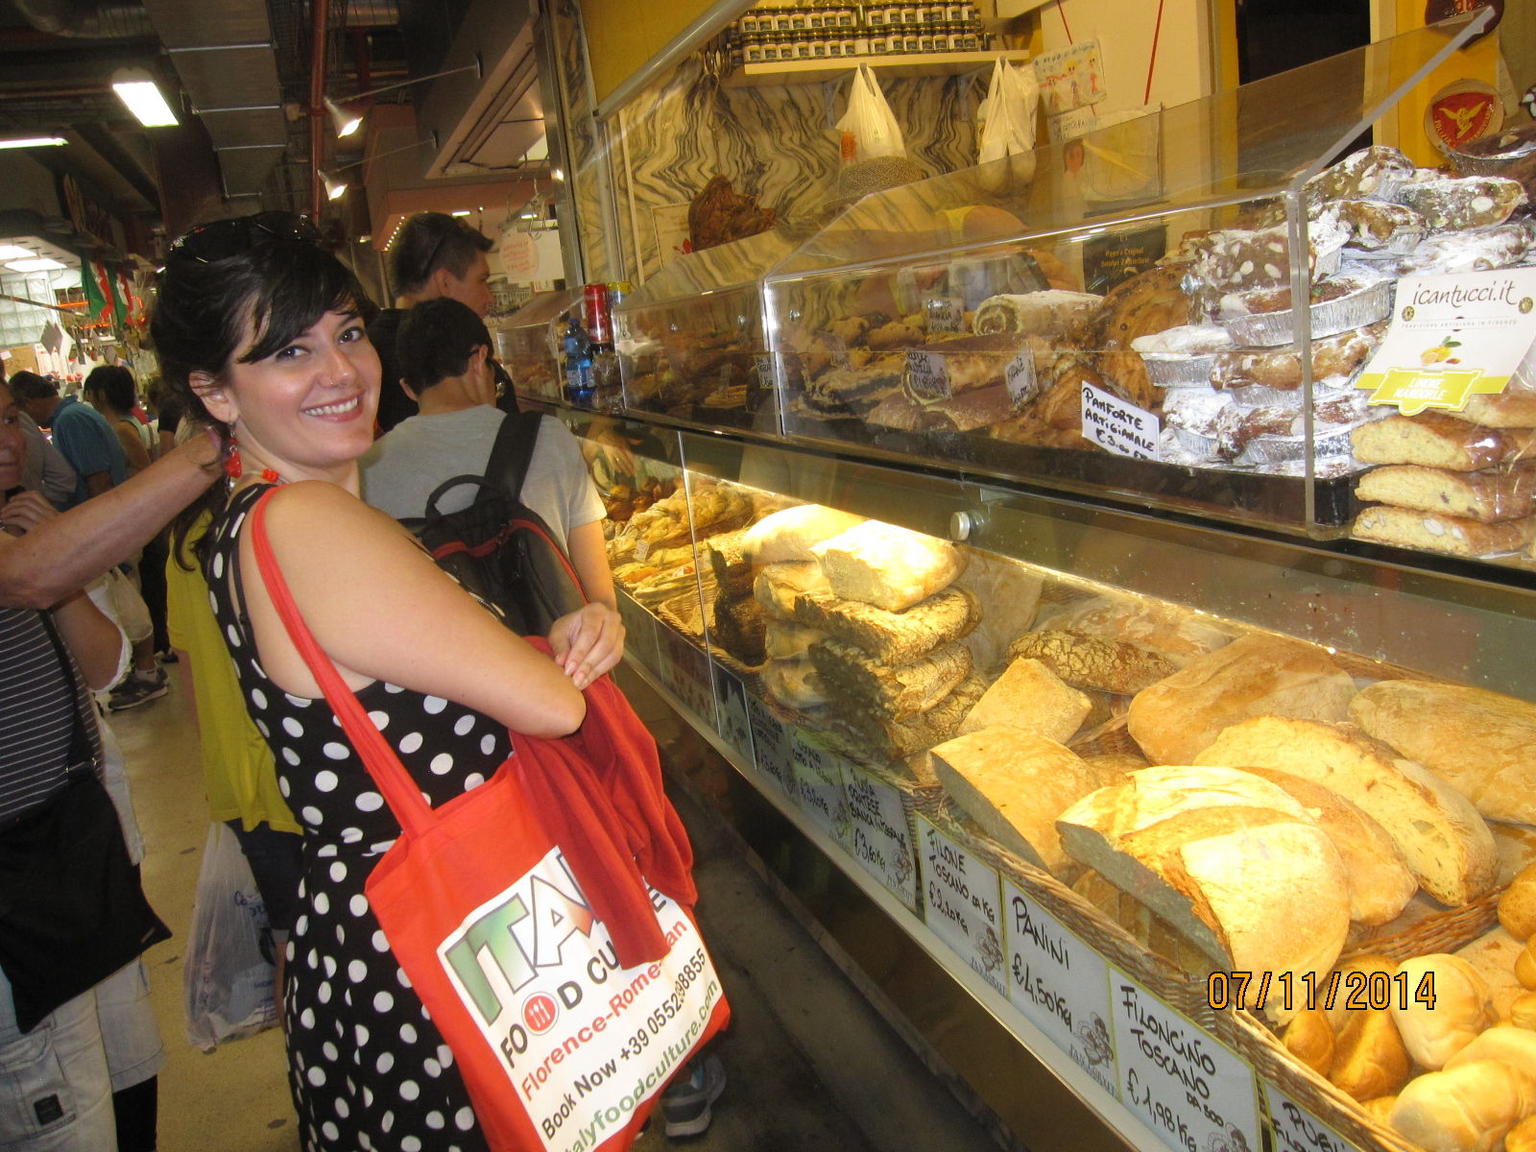 Our guide Coral picking out some great Florence breads!